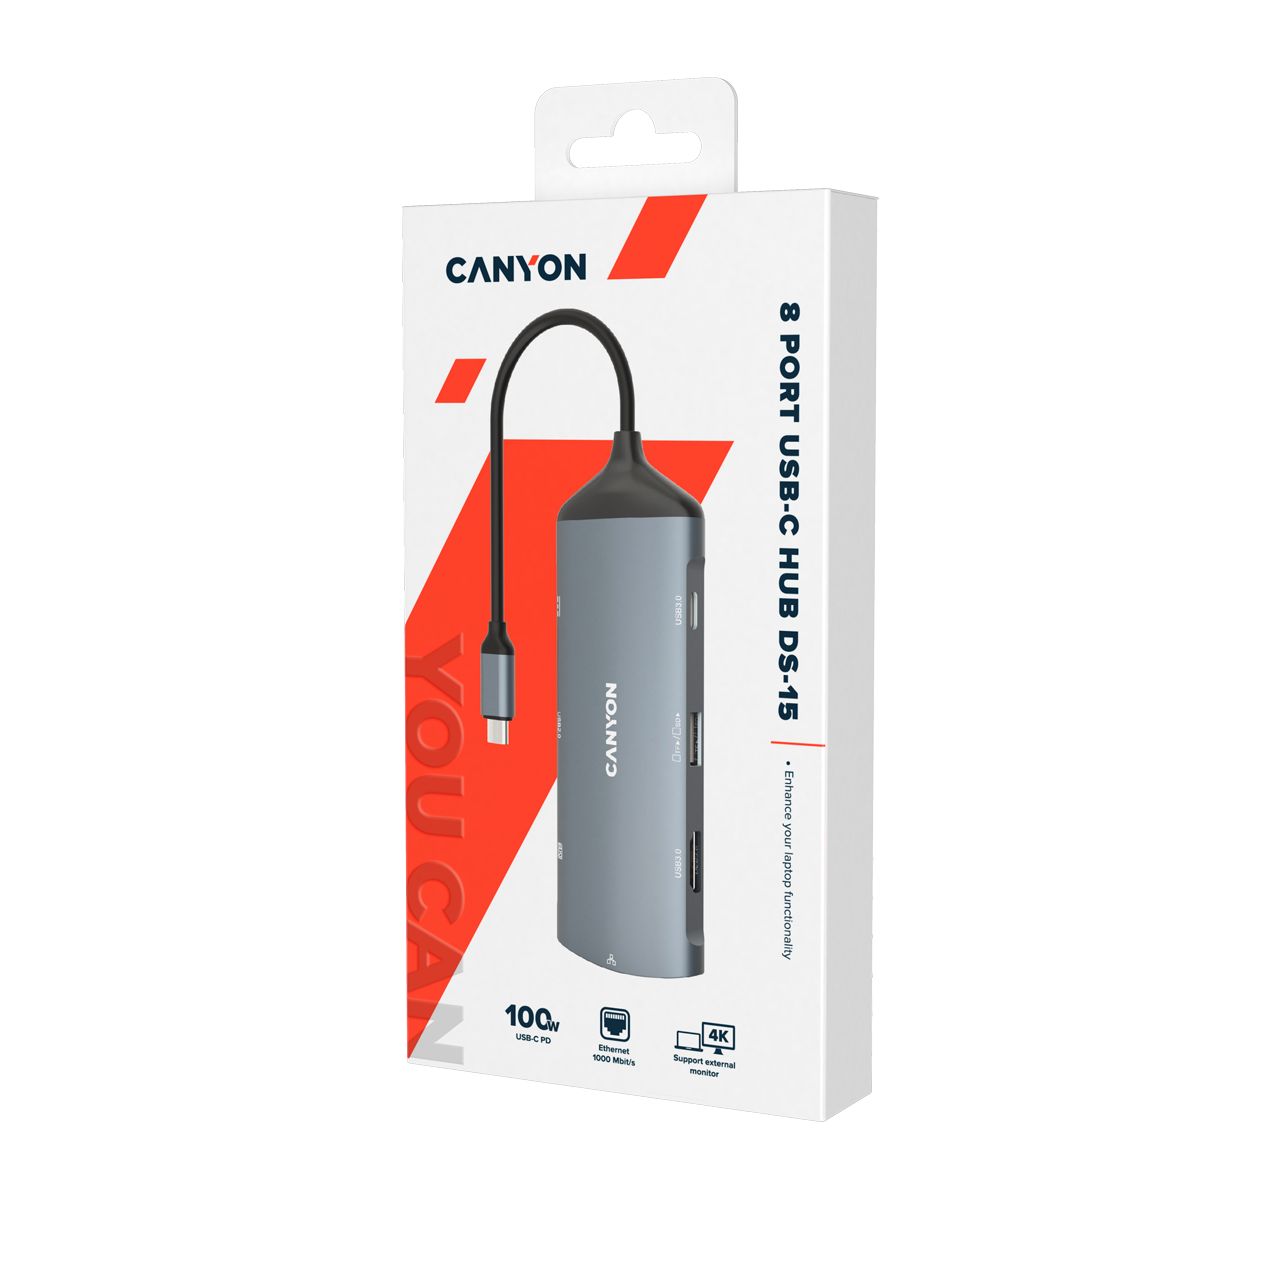 CANYON 8 in 1 hub, with 1*HDMI,1*Gigabit Ethernet,1*USB C female:PD3.0 support max60W,1*USB C male :PD3.0 support max100W,2*USB3.1:support max 5Gbps,1*USB2.0:support max 480Mbps, 1*SD, cable 15cm, Aluminum alloy housing,133.24*48.7*15.3mm,Dark grey_2